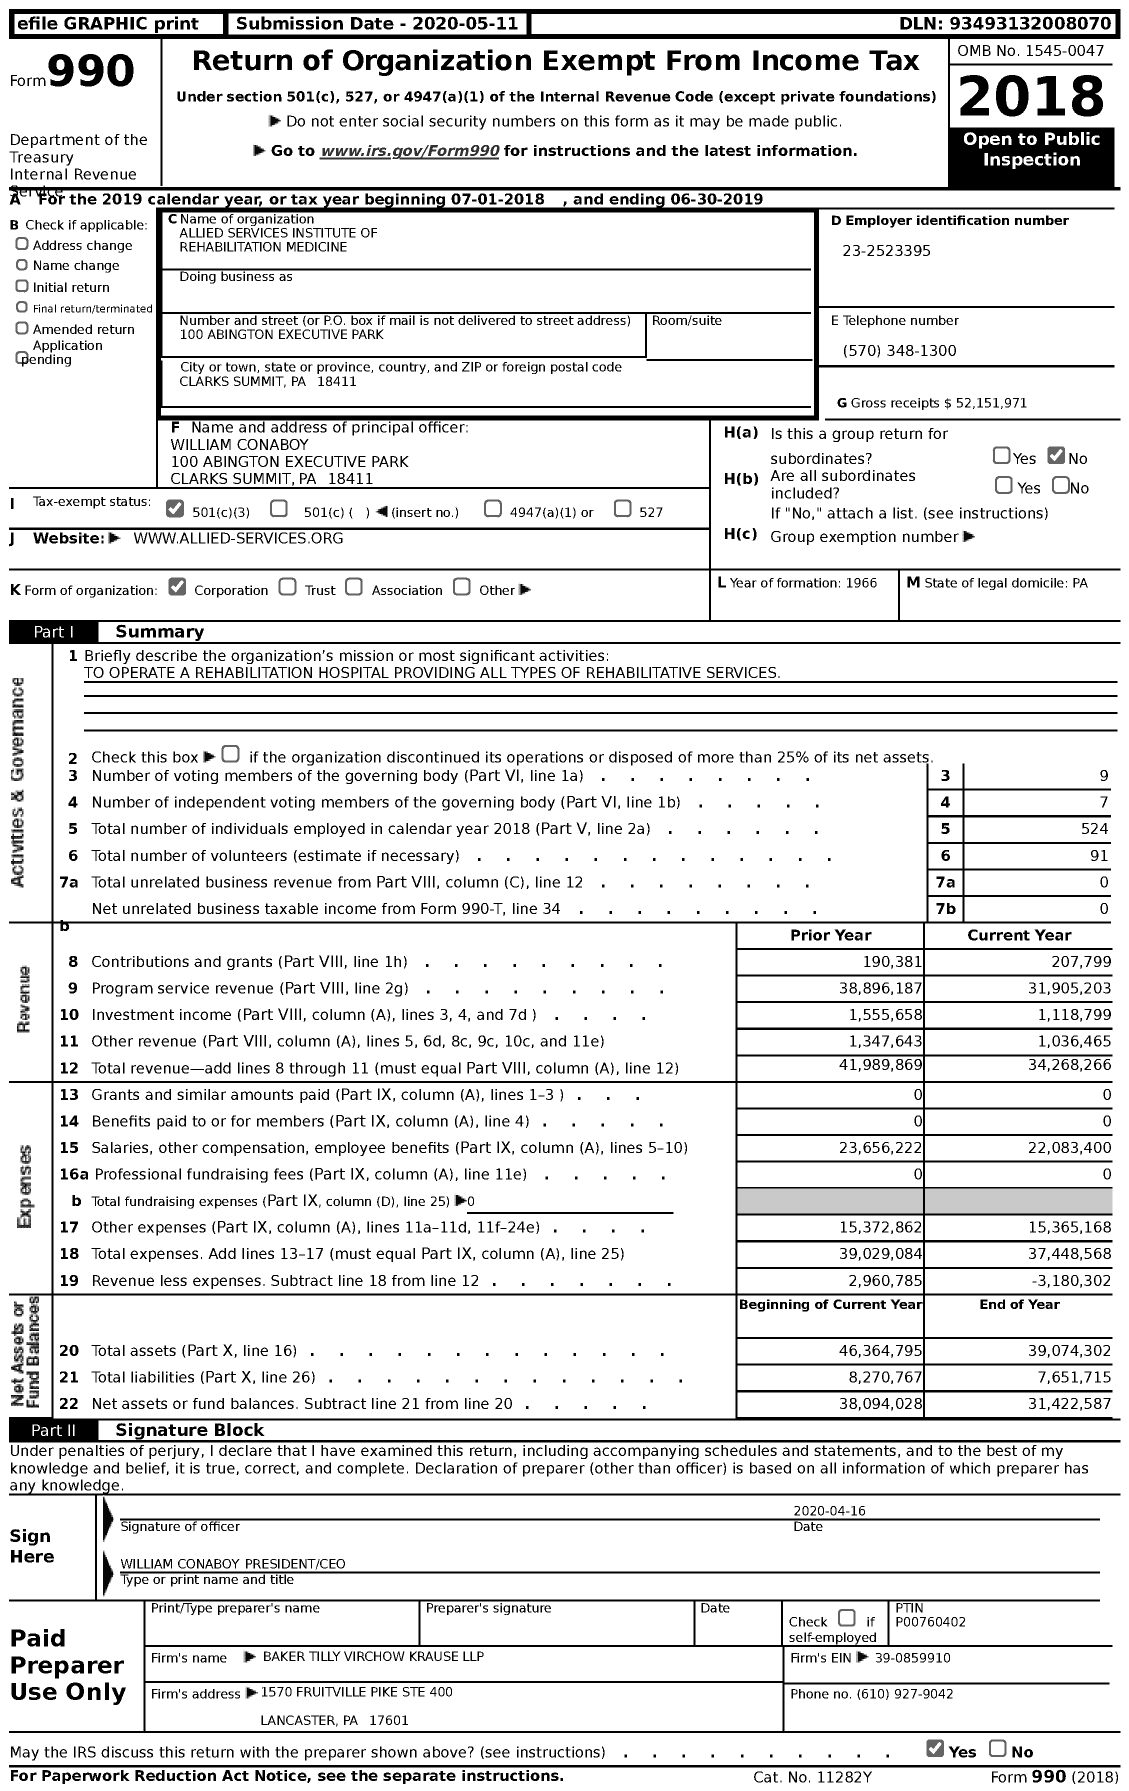 Image of first page of 2018 Form 990 for Allied Services Institute of Rehabilitation Medicine